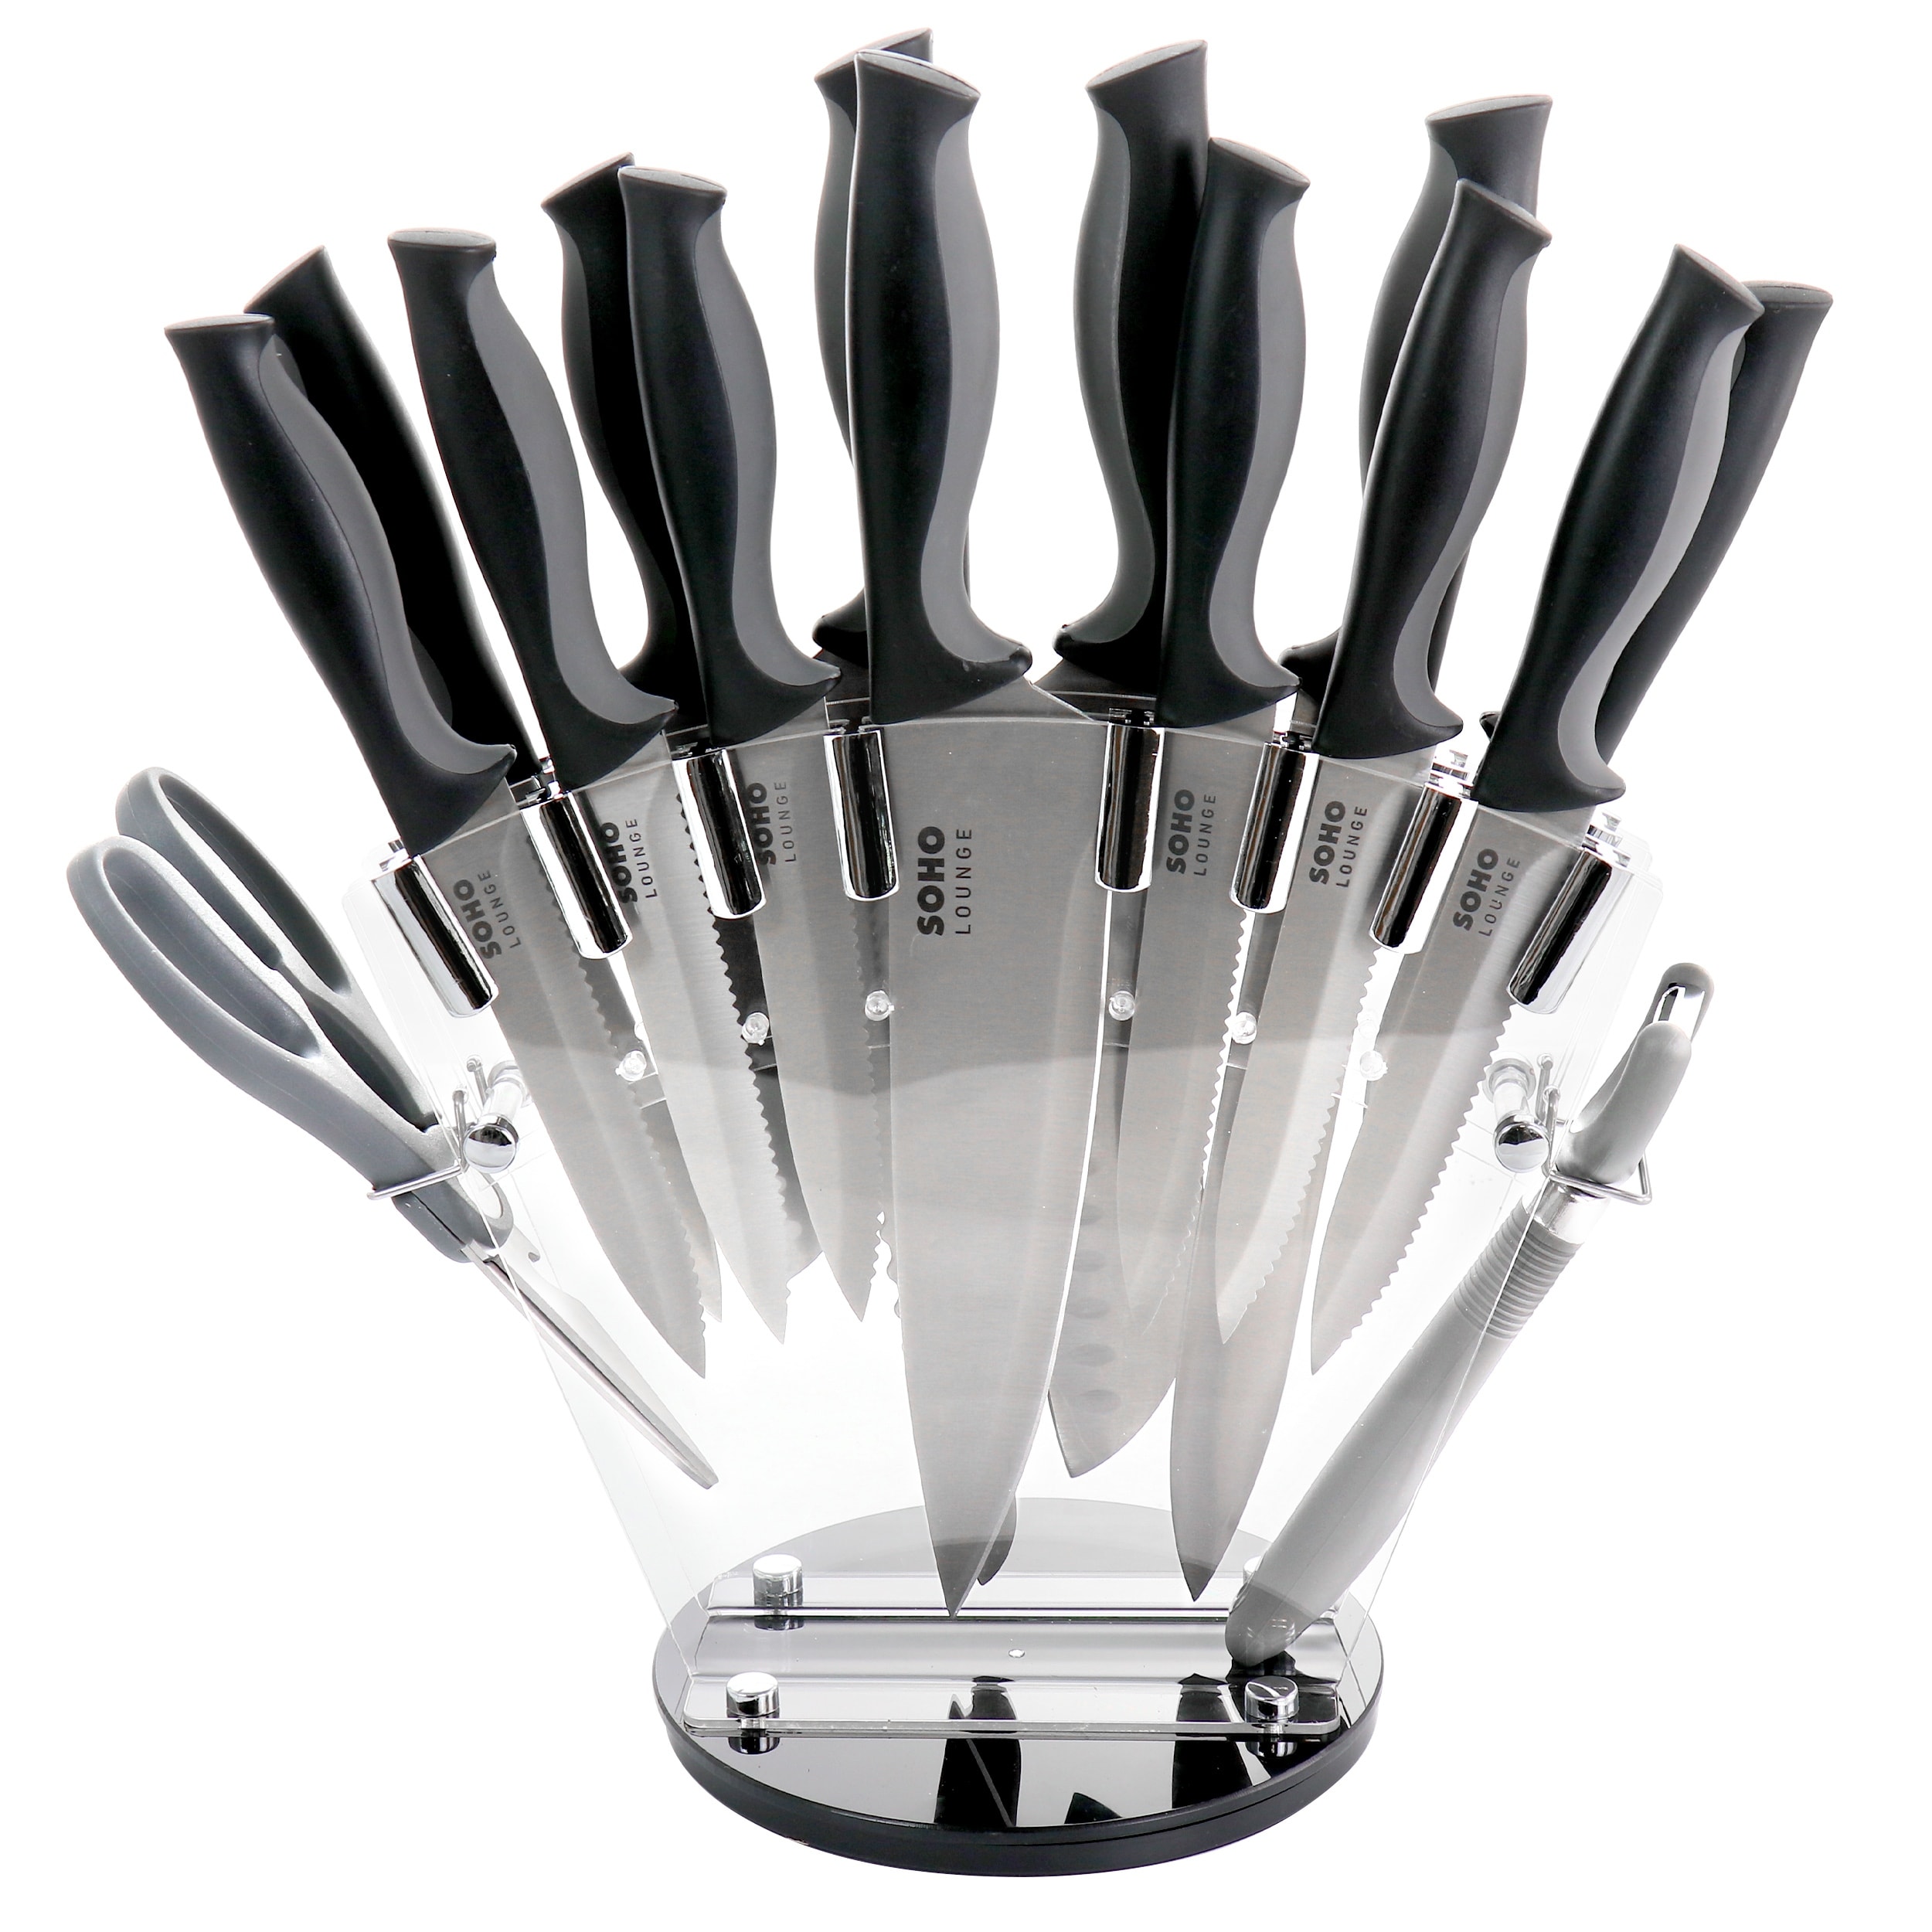 https://ak1.ostkcdn.com/images/products/is/images/direct/602c54da683d254ded1f6e45168347a92af327c5/Gibson-Soho-Lounge-16pc-Stainless-Steel-Cutlery-Knife-Set-with-Stand.jpg